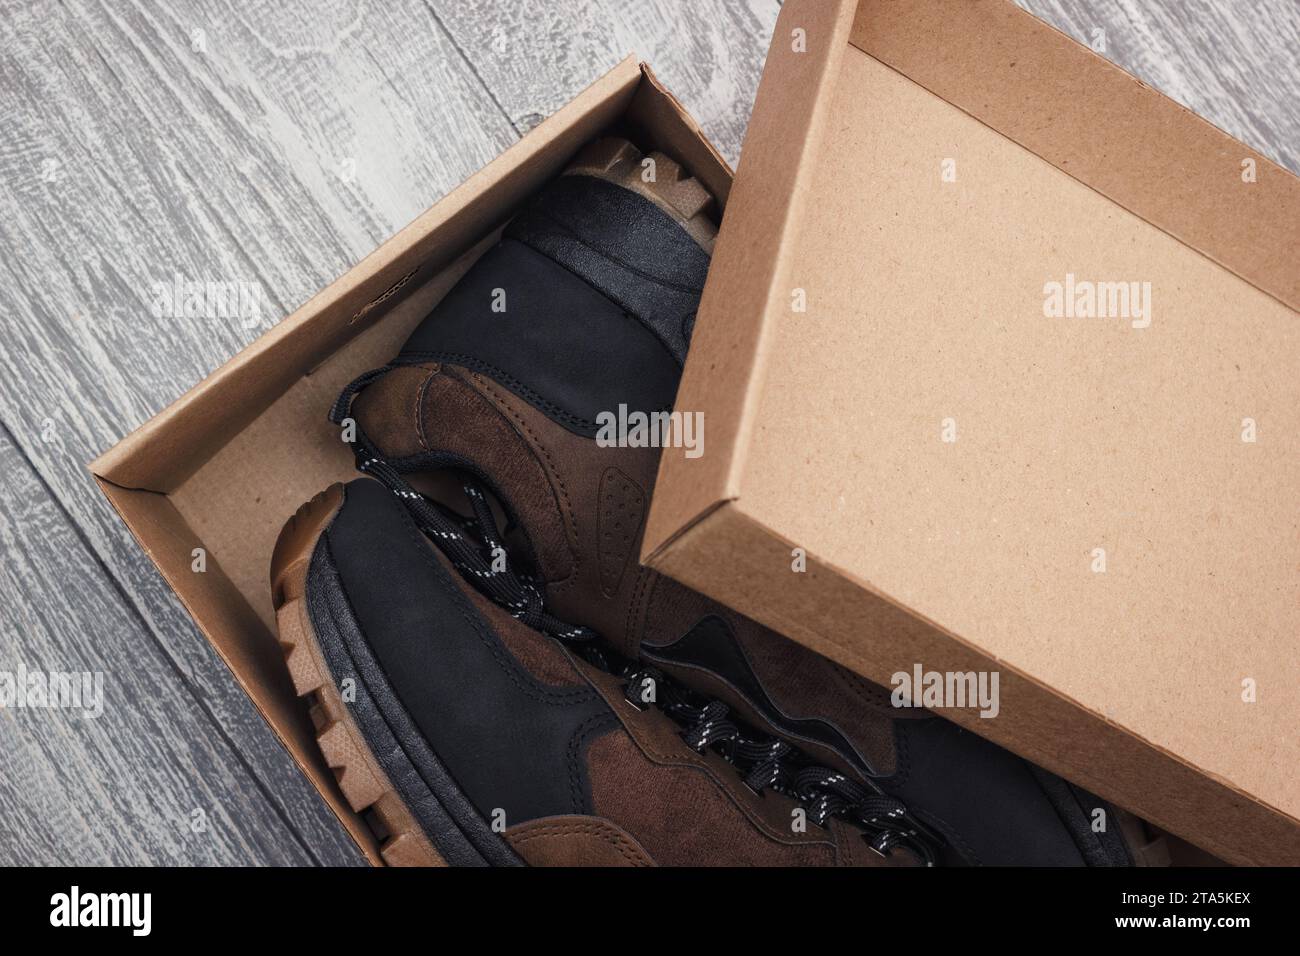 Open The Box With A Pair Of New Shoes. Closeup View On The Purchased Footwear In Paper Package. Stock Photo